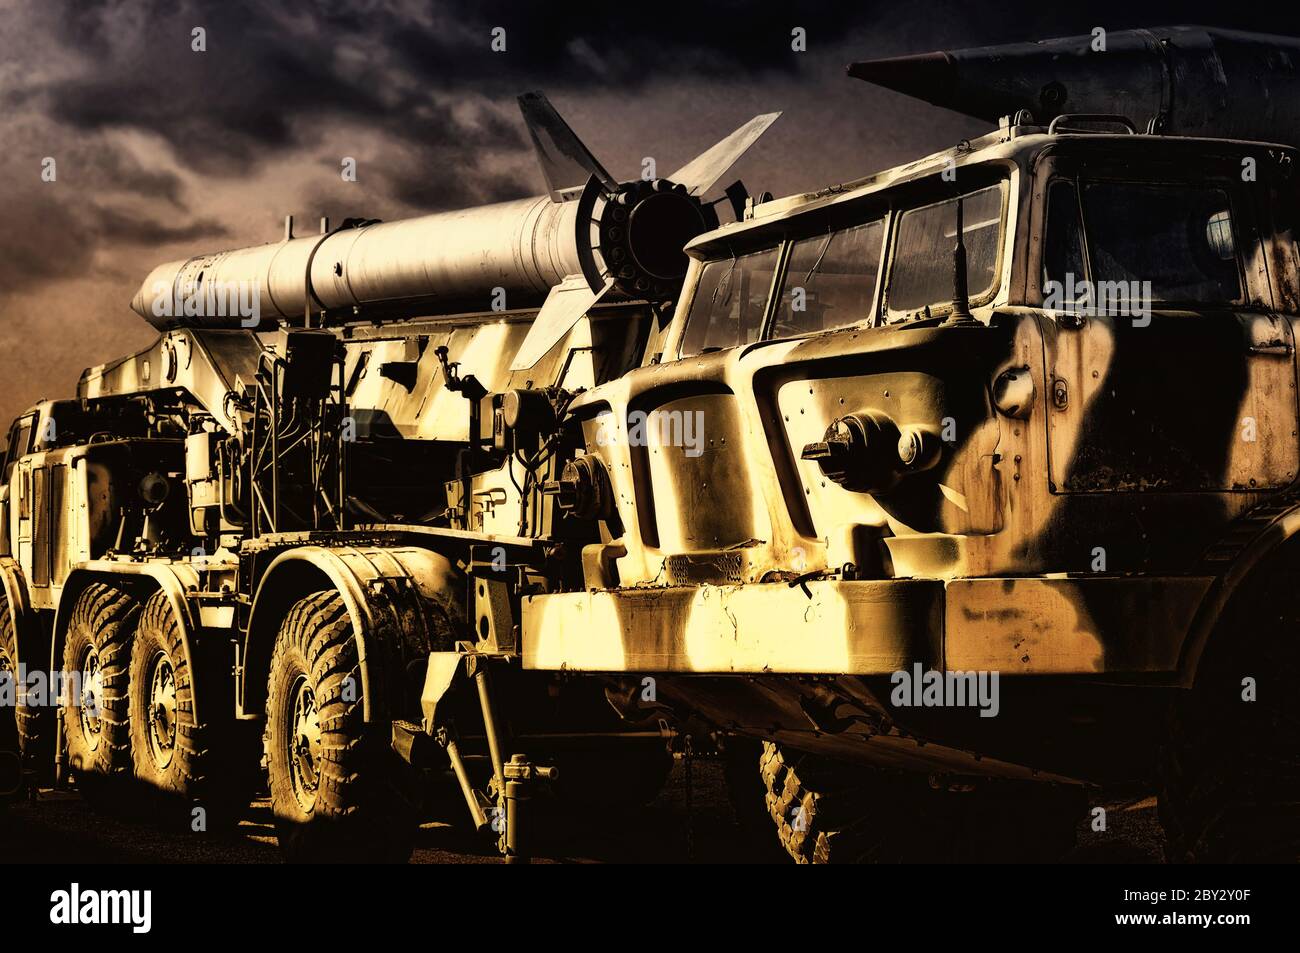 Vintage russian military transport with rockets Stock Photo